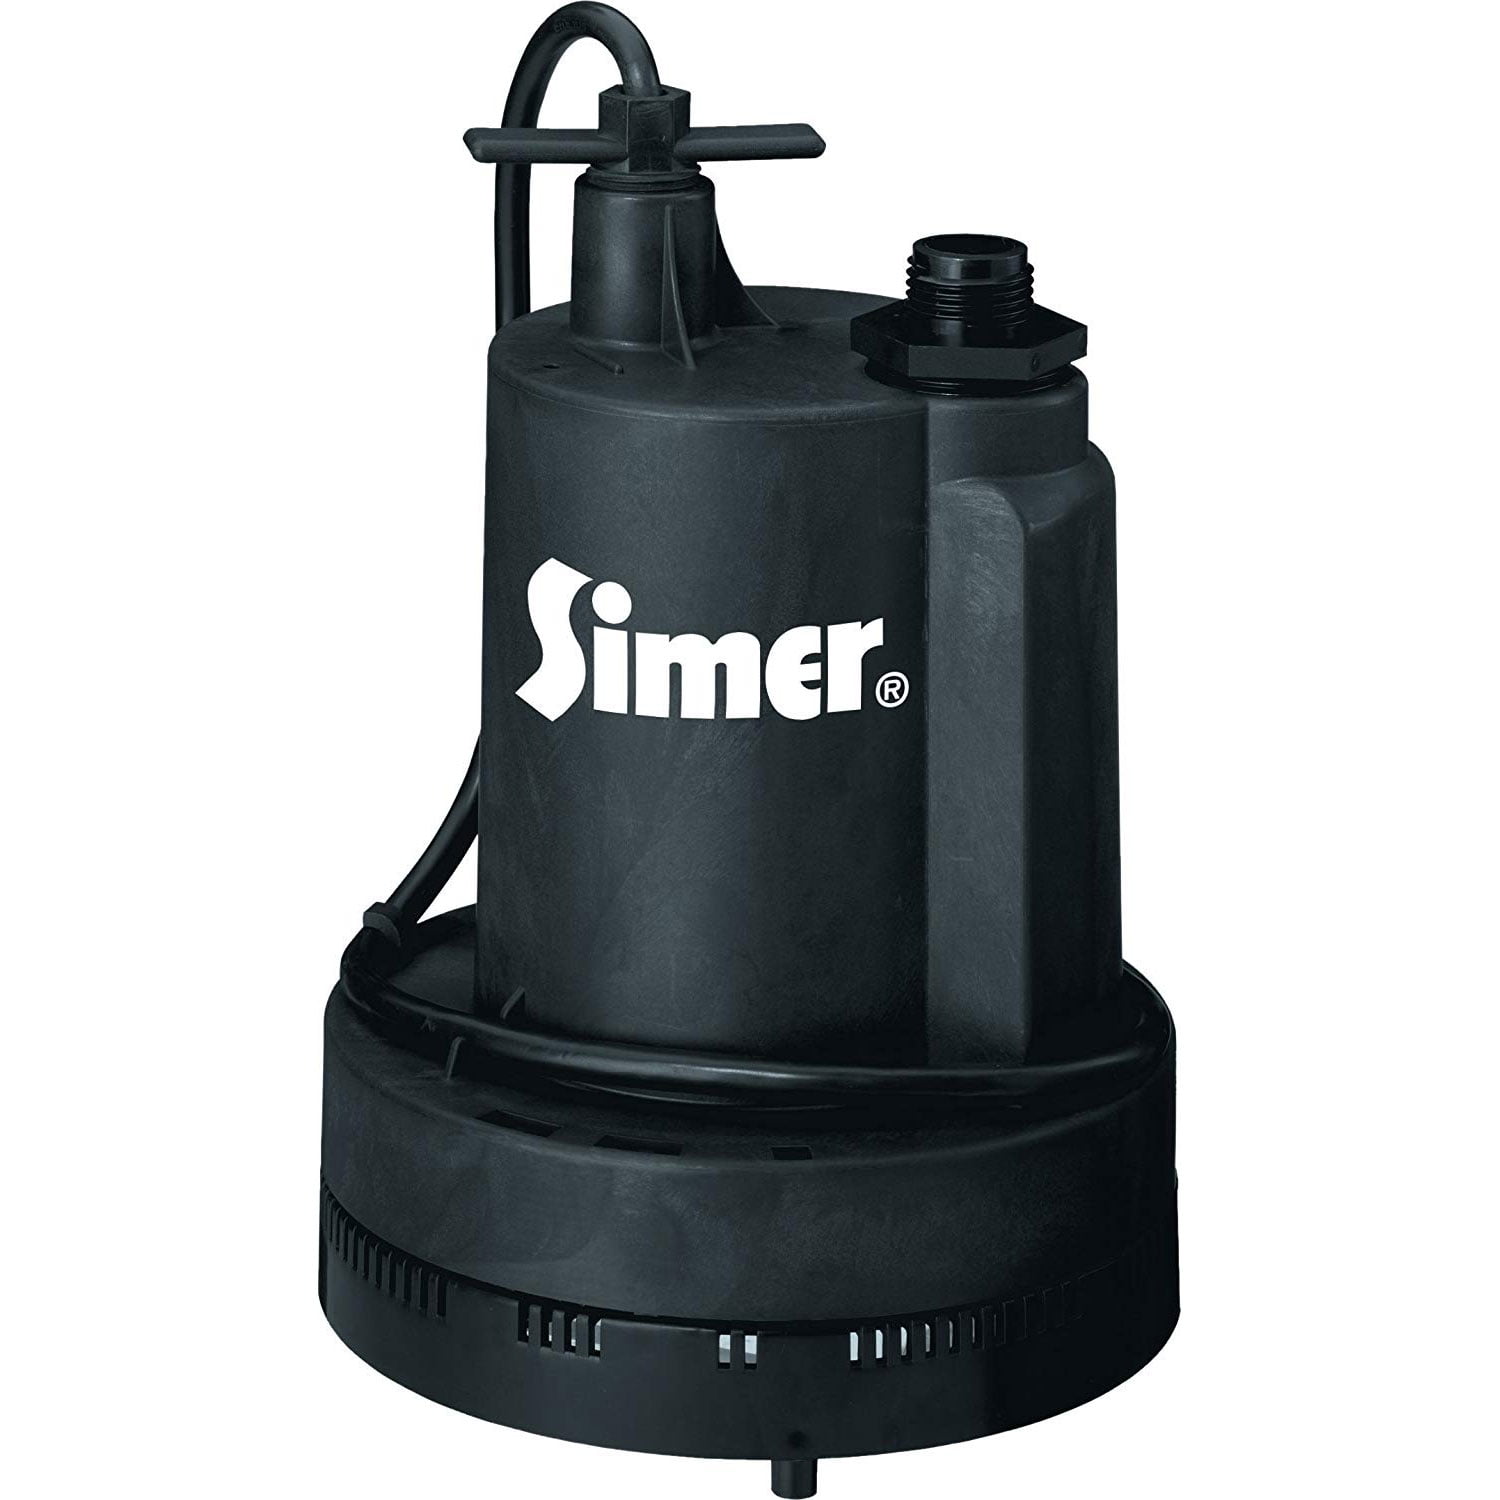 Simer 4075SS01 0.75 HP Stainless Steel Water Pressure Booster Home Faucet Pump 